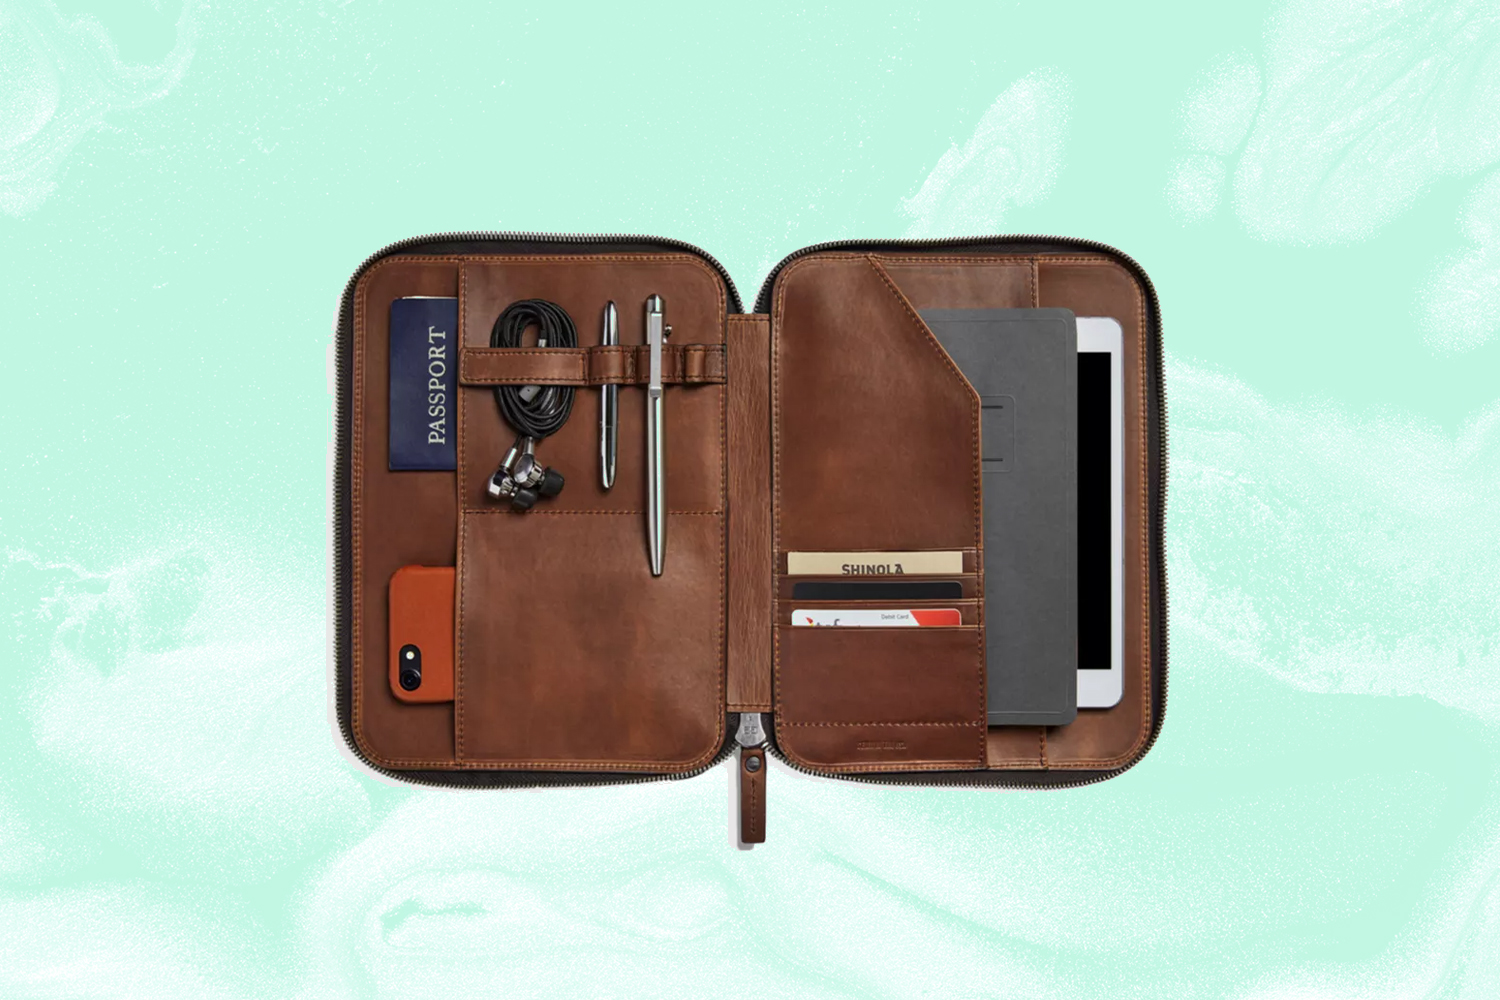 The 15 Best Tech Organizer Bags to Store and Protect Your Gadgets